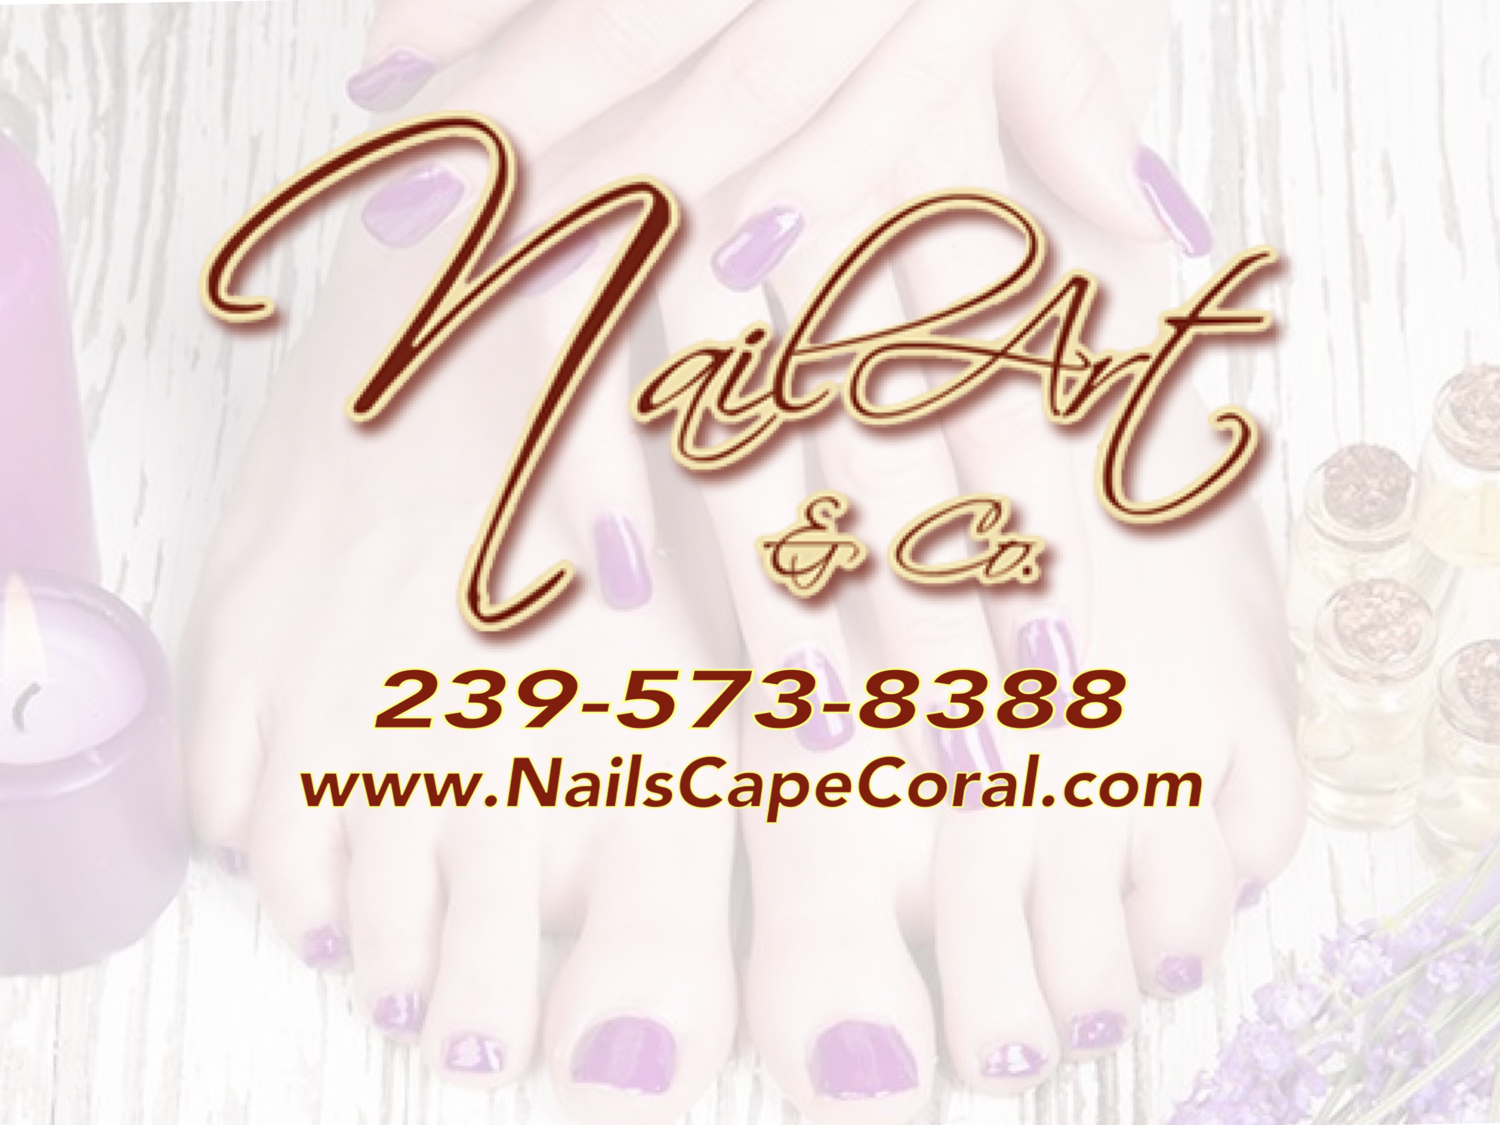 Nail Art in Cape Coral - wide 1